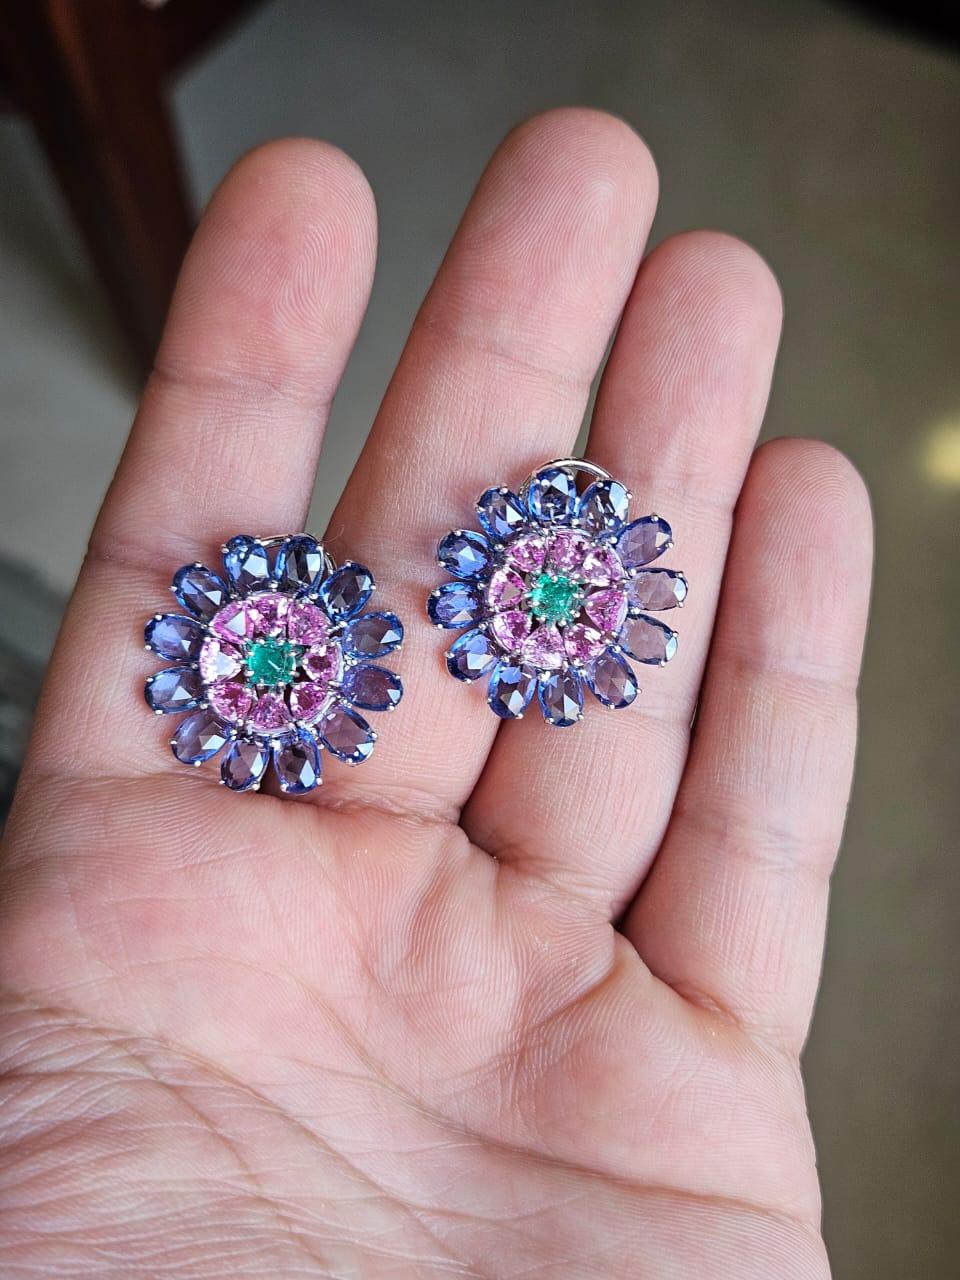 A very gorgeous and beautiful, Emerald & Multi Sapphires Stud Earrings set in 18K White Gold. The weight of the Emerald Sugarloafs is 0.63 carats. The Emeralds are completely natural, without any treatment and are of Colombian origin. The combined